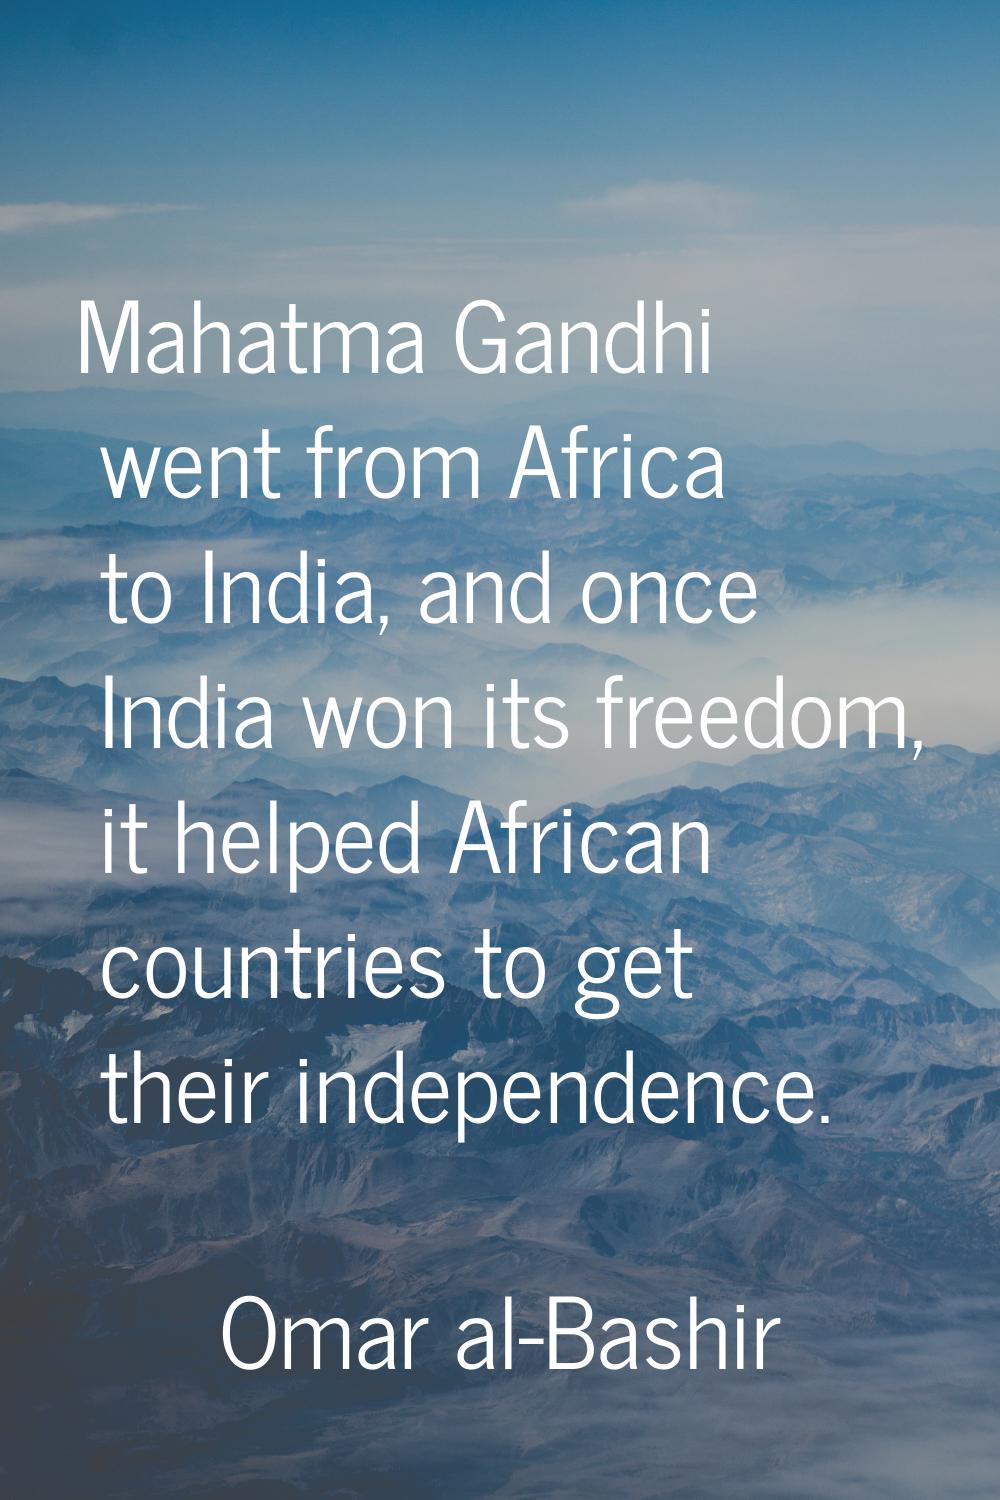 Mahatma Gandhi went from Africa to India, and once India won its freedom, it helped African countri